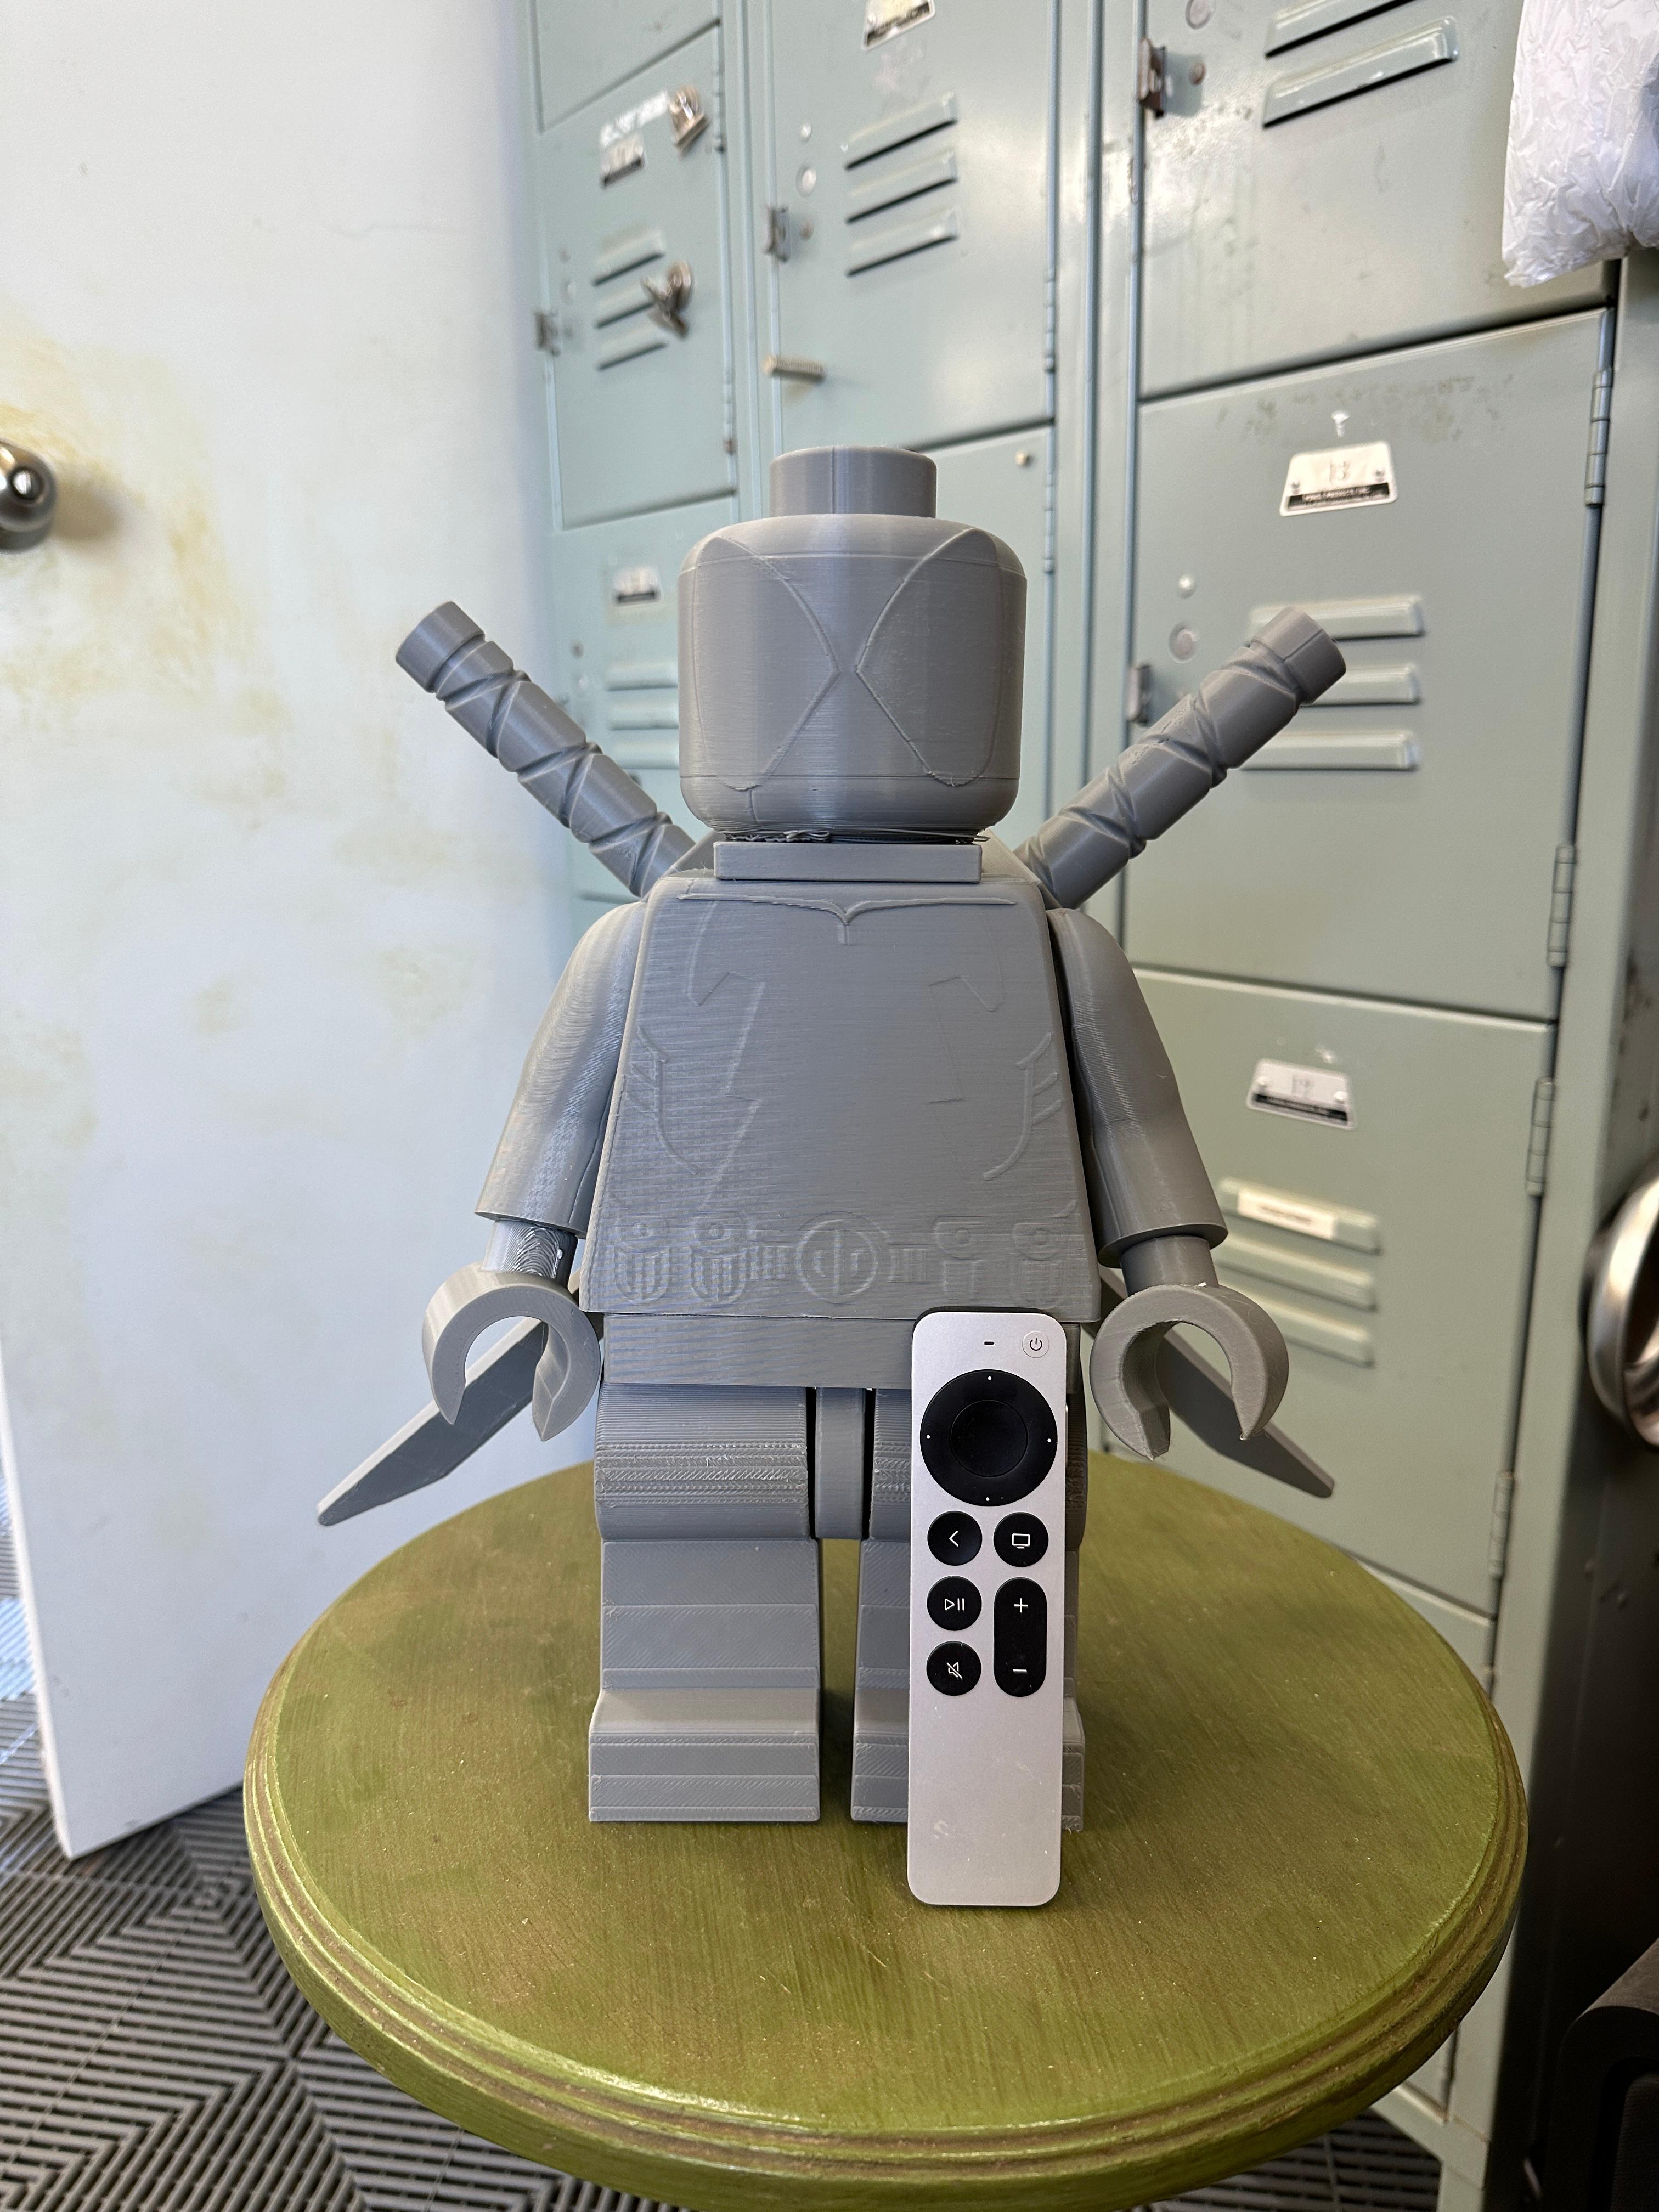 Deadpool LEGO STL file - 800% blowup. Apple TV remote for scale. Needs some sanding and touch up followed by some paint. Great build! - 3d model